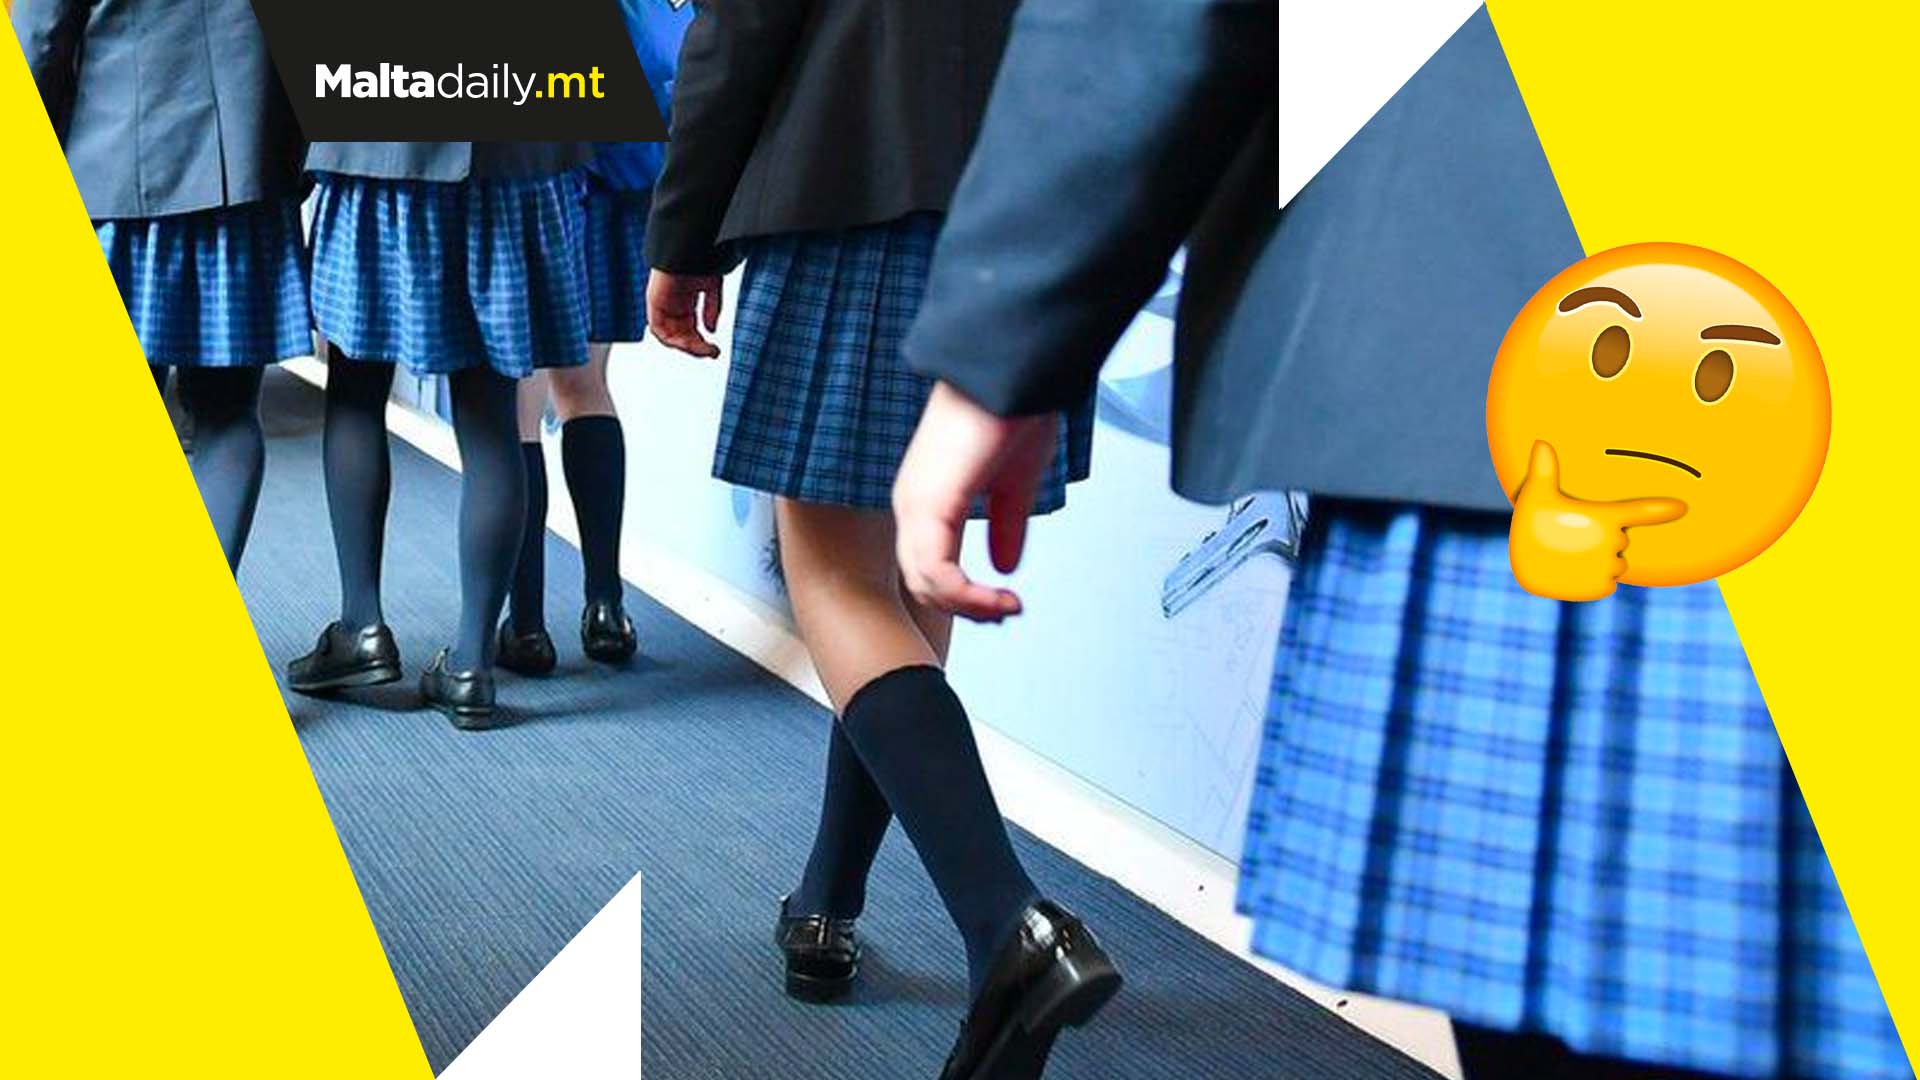 US school no longer permitted to force girls to wear skirts